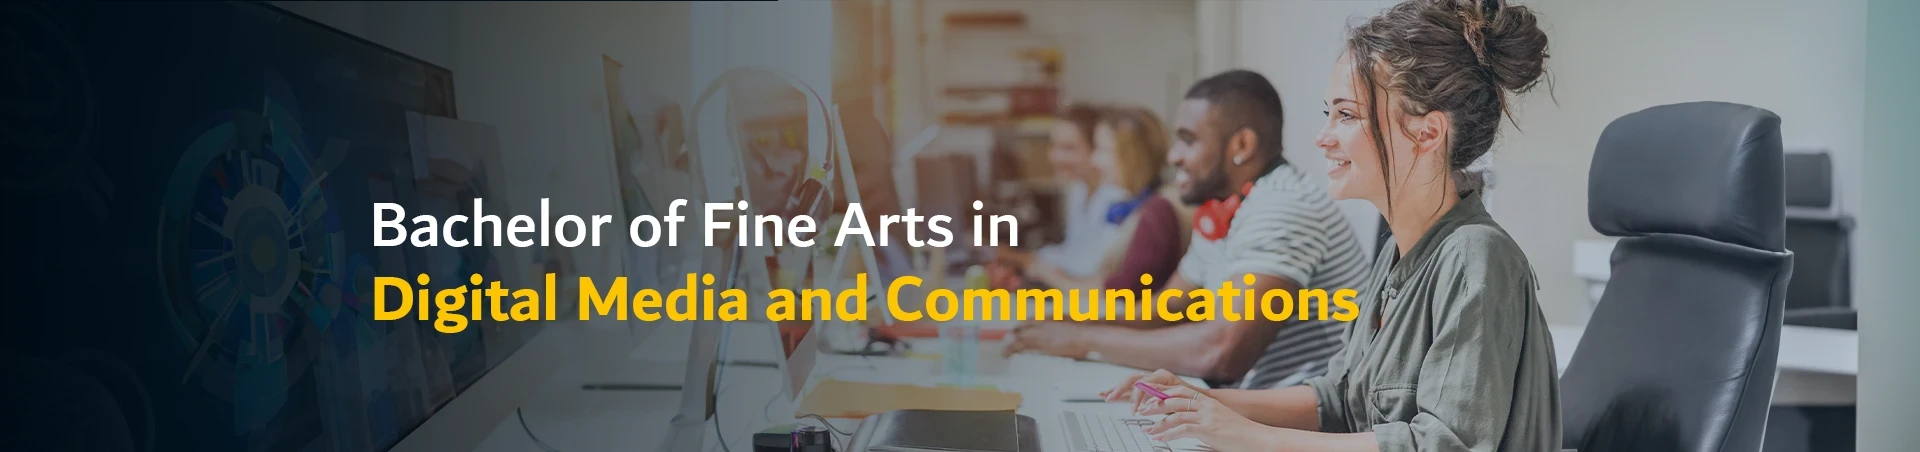 Bachelor of Fine Arts in Digital Media and Communications